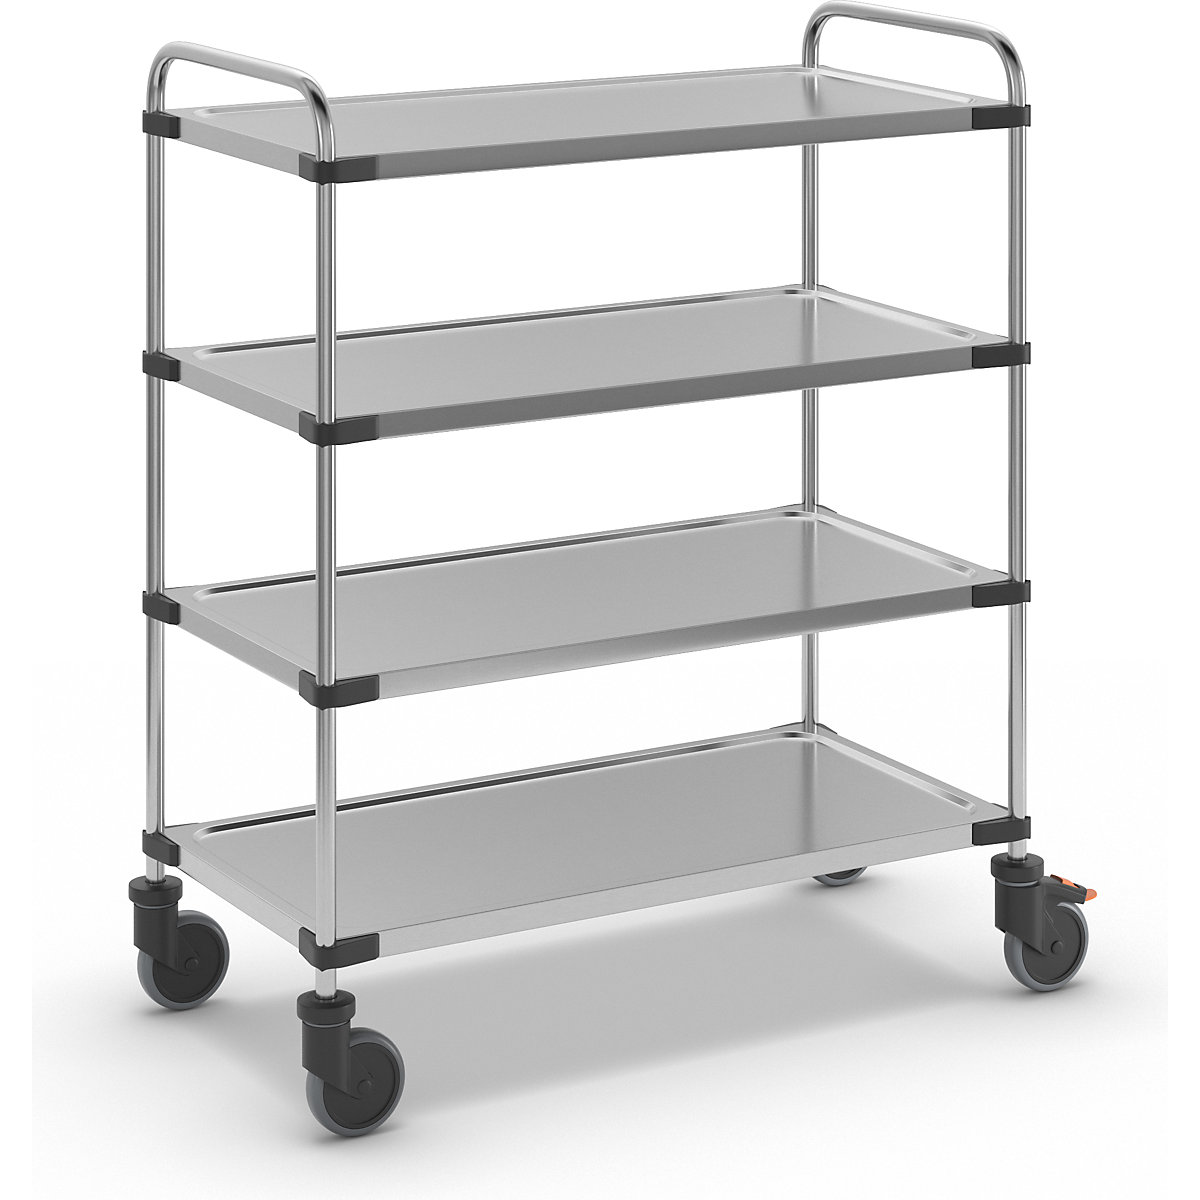 Stainless steel table trolley, with 4 shelves, LxWxH 1070 x 570 x 1260 mm, unassembled-4